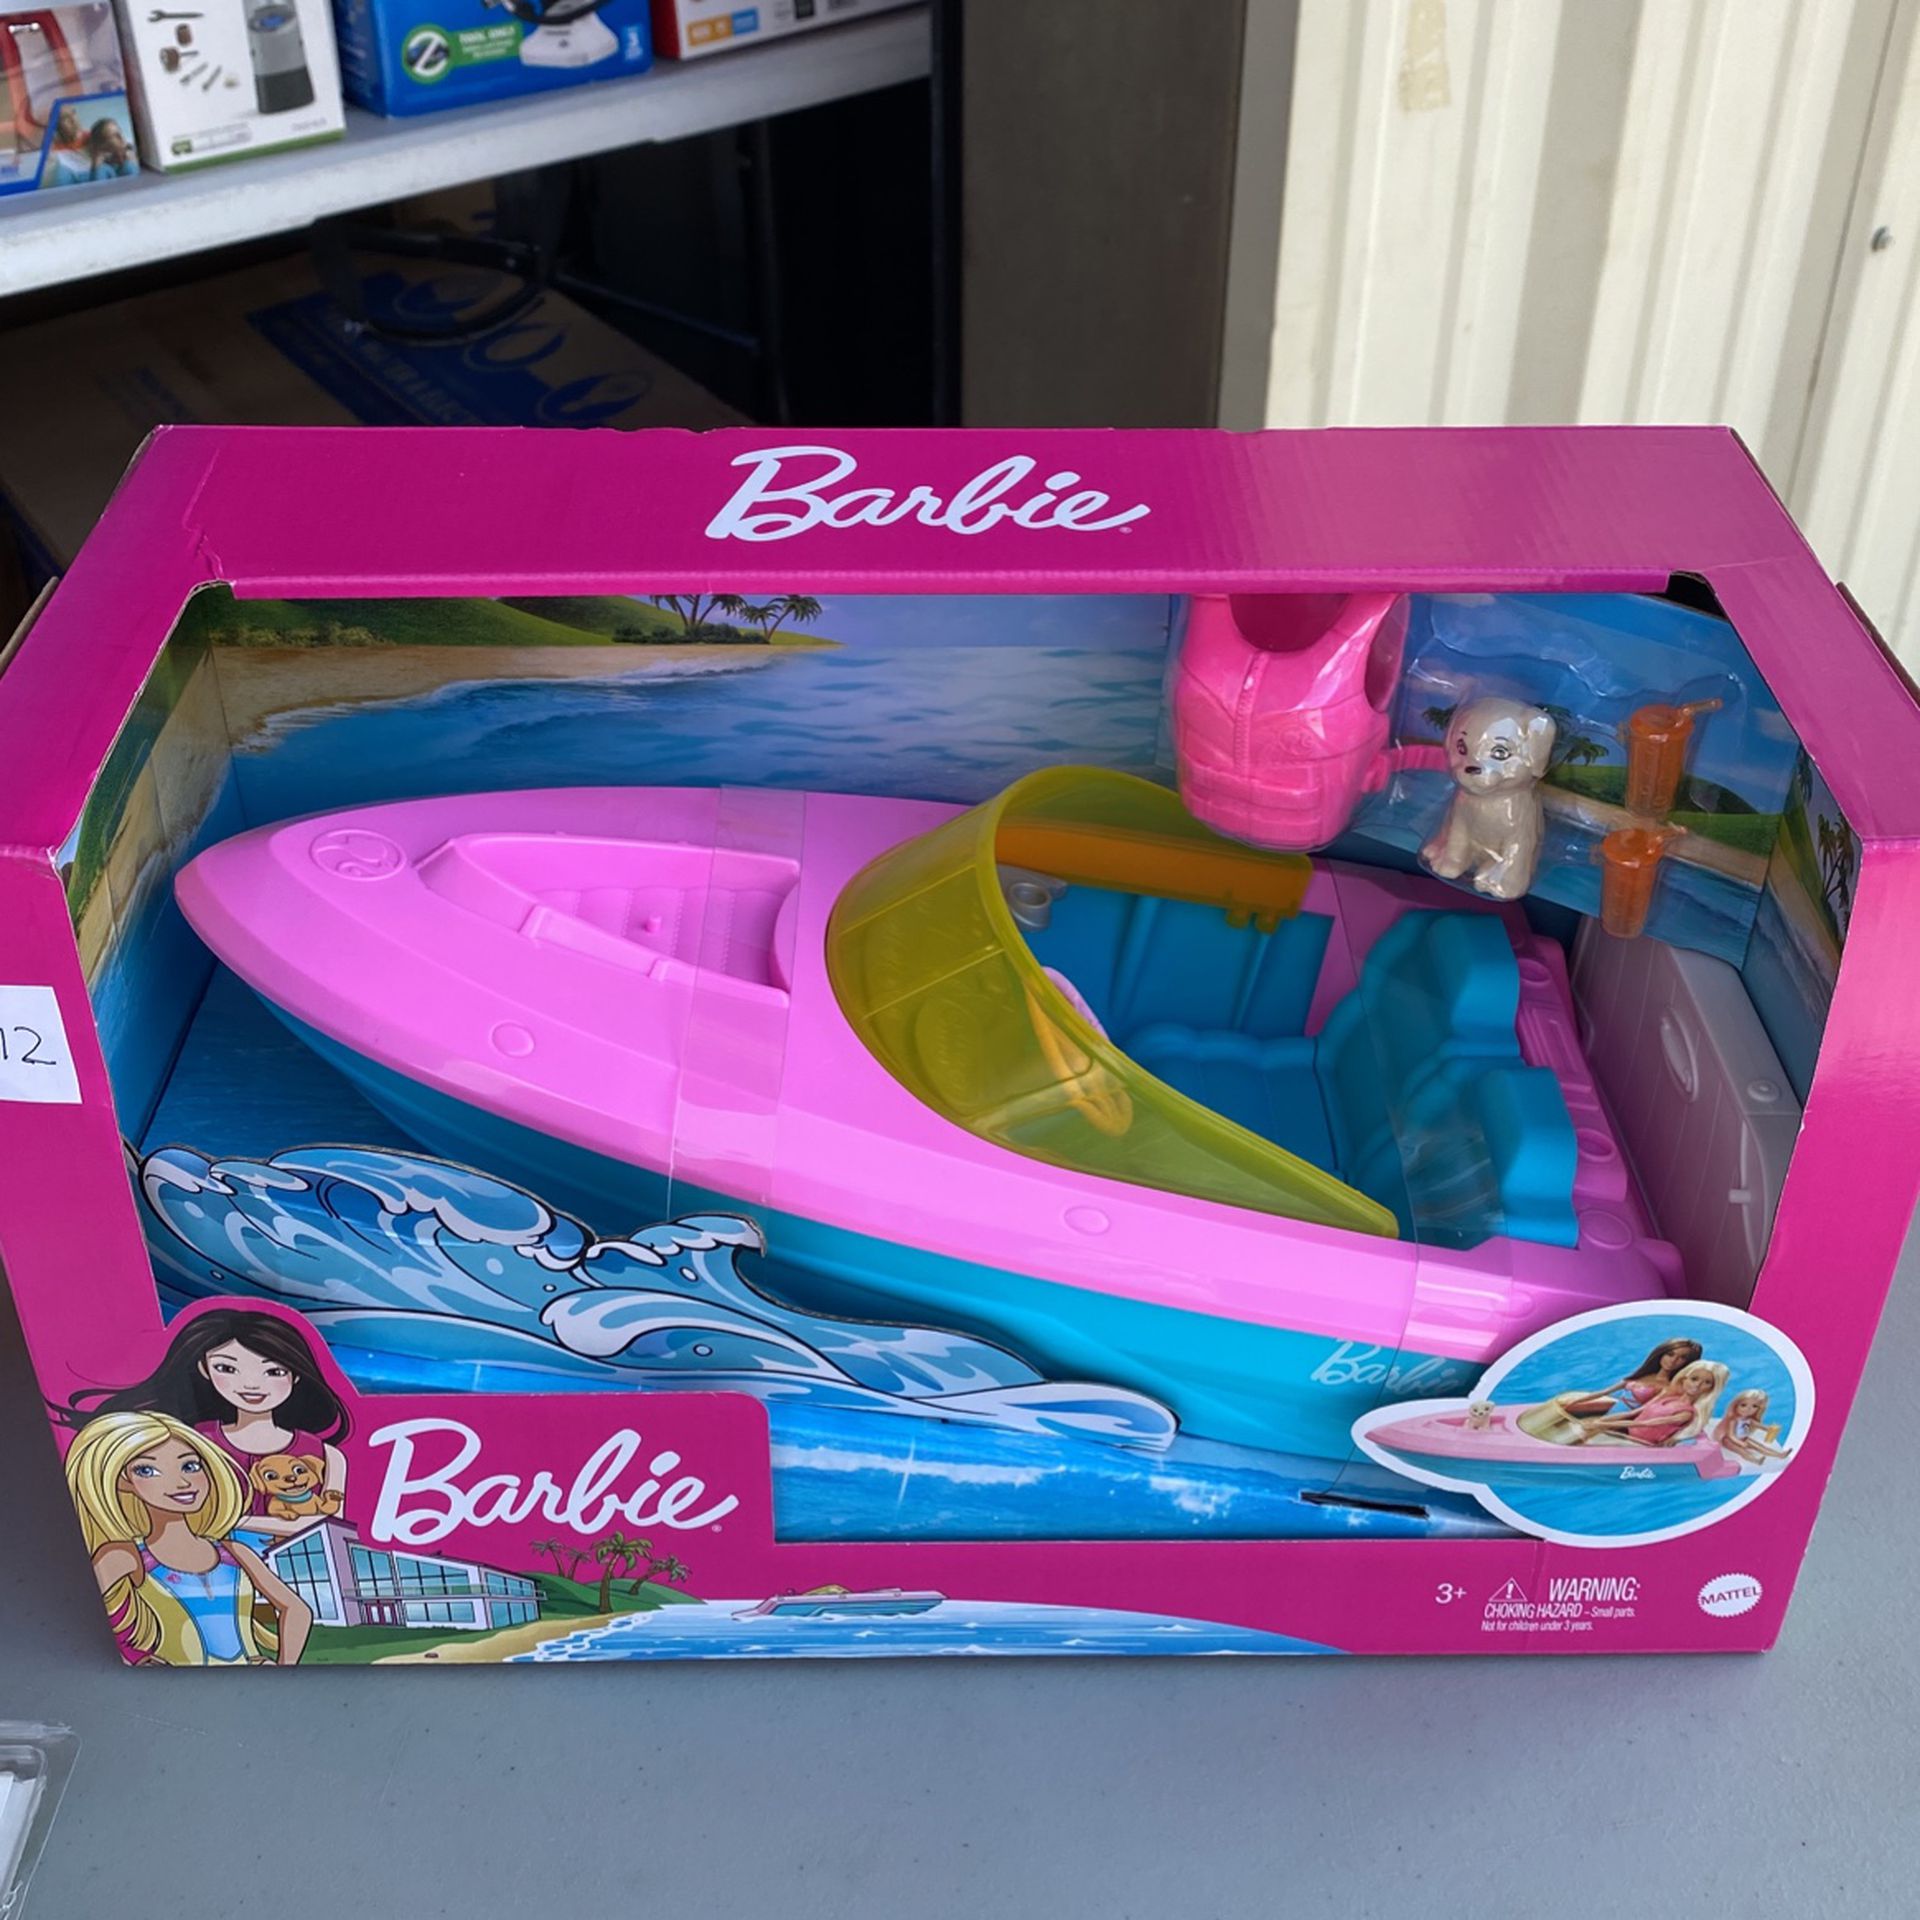 Barbie Boat With Puppy And Accessories, Fits 3 Dolls, Floats In Water, 3 To  7 Year Olds